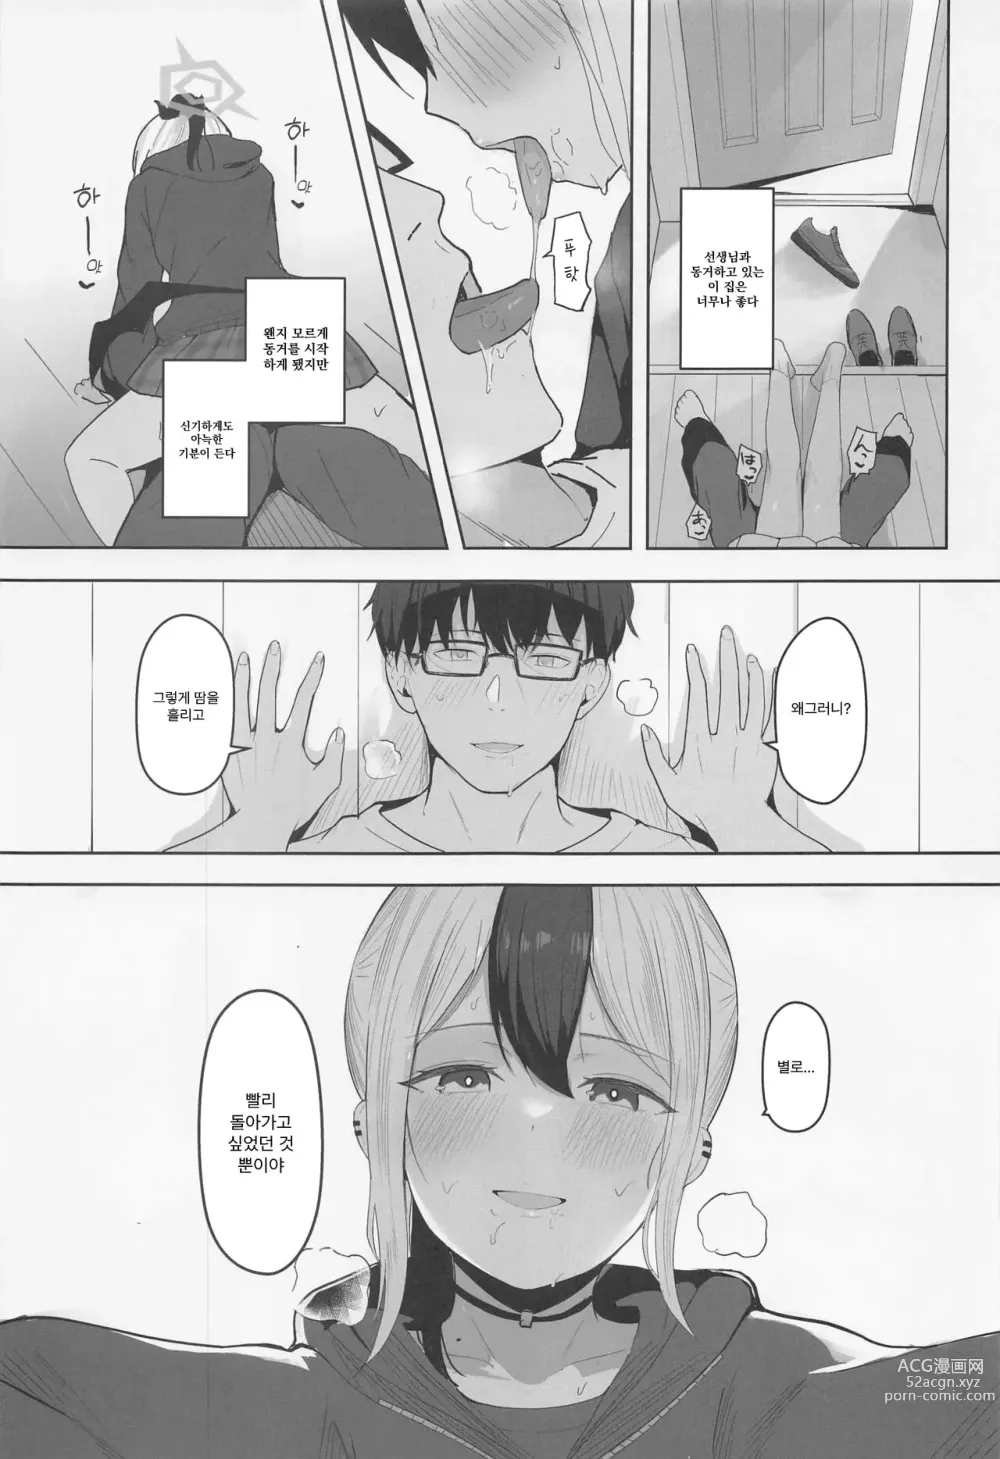 Page 4 of doujinshi 카요코와 동거성생활